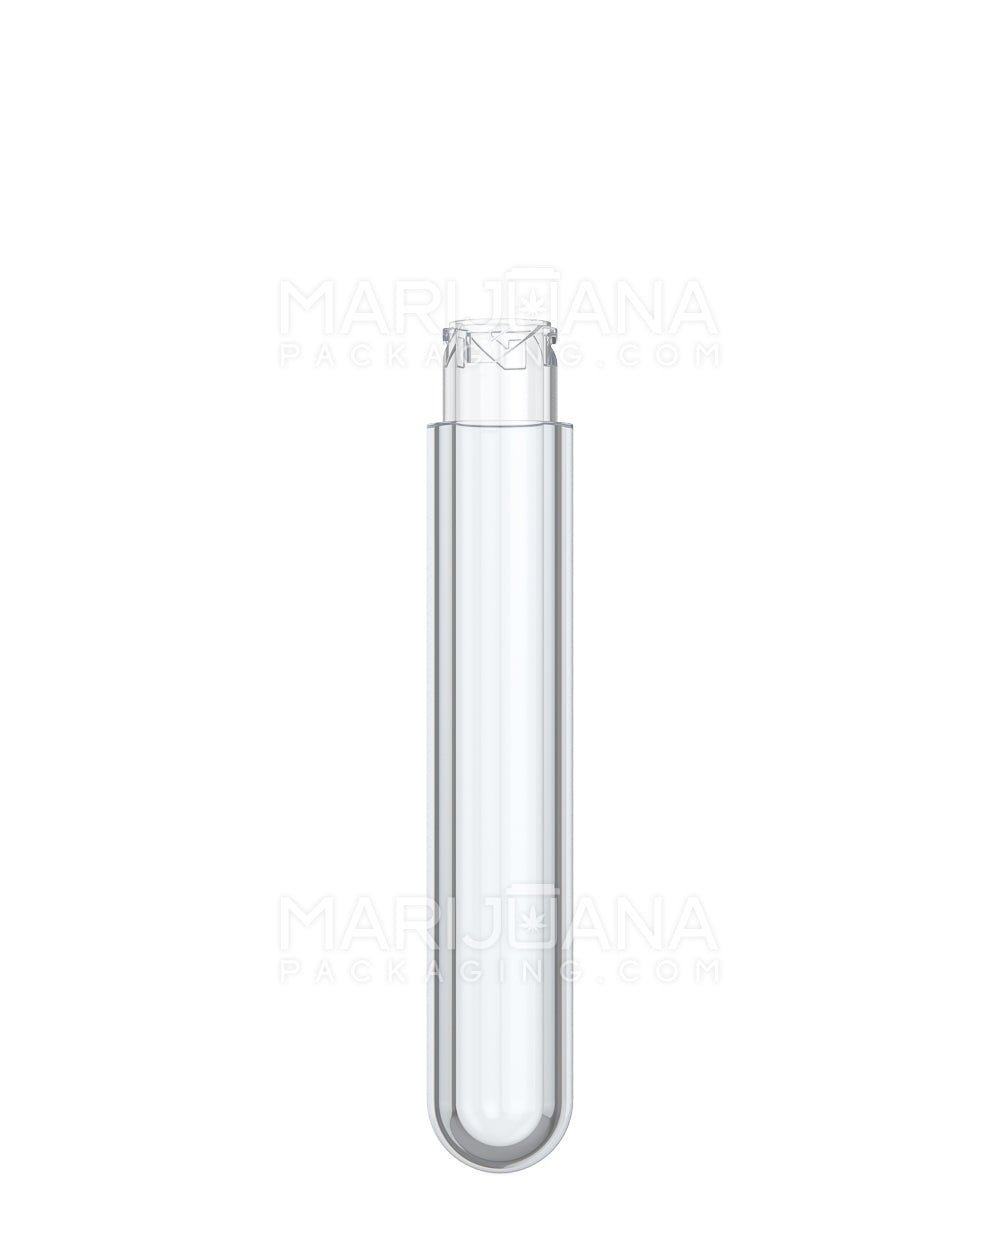 POLLEN GEAR | Transparent Pre-Roll & Vaporizer Tall Round Plastic Slim Tubes | 109mm - Clear - 1000 Count - 2